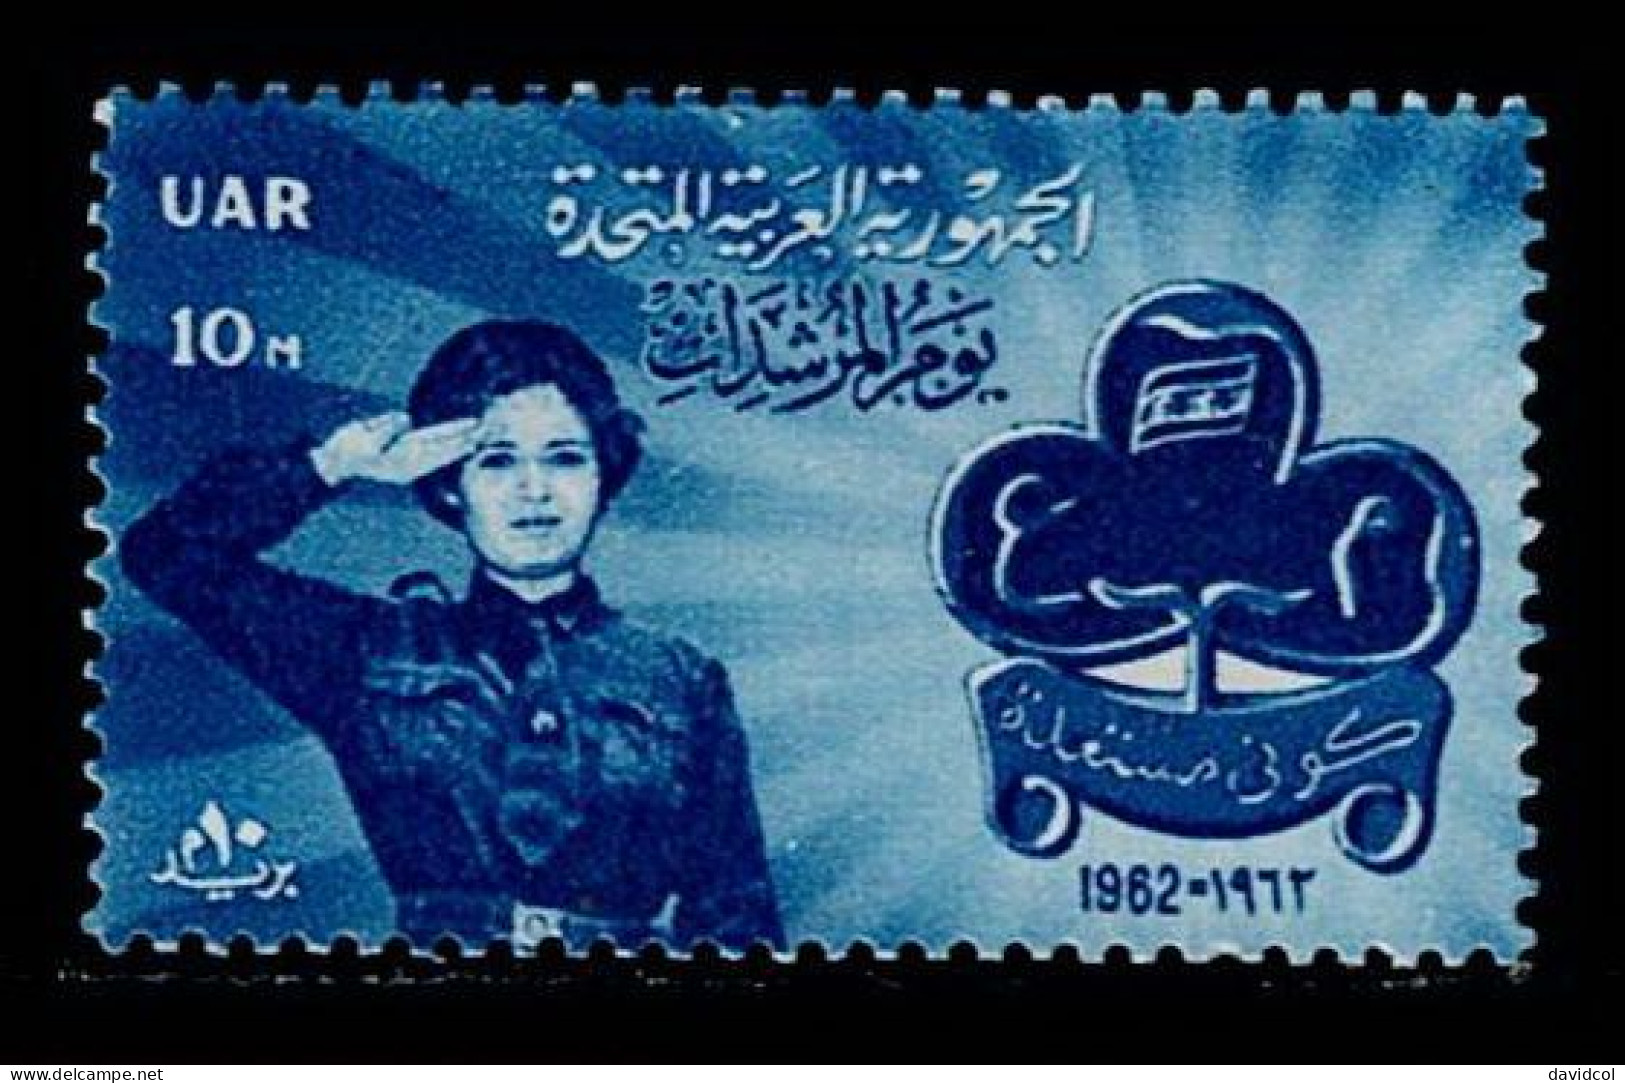 EGI-04- EGYPT - 1962 - MNH -SCOUTS- 25TH ANNIVERSARY OF THE EGYPTIAN GIRL SCOUTS - Nuevos